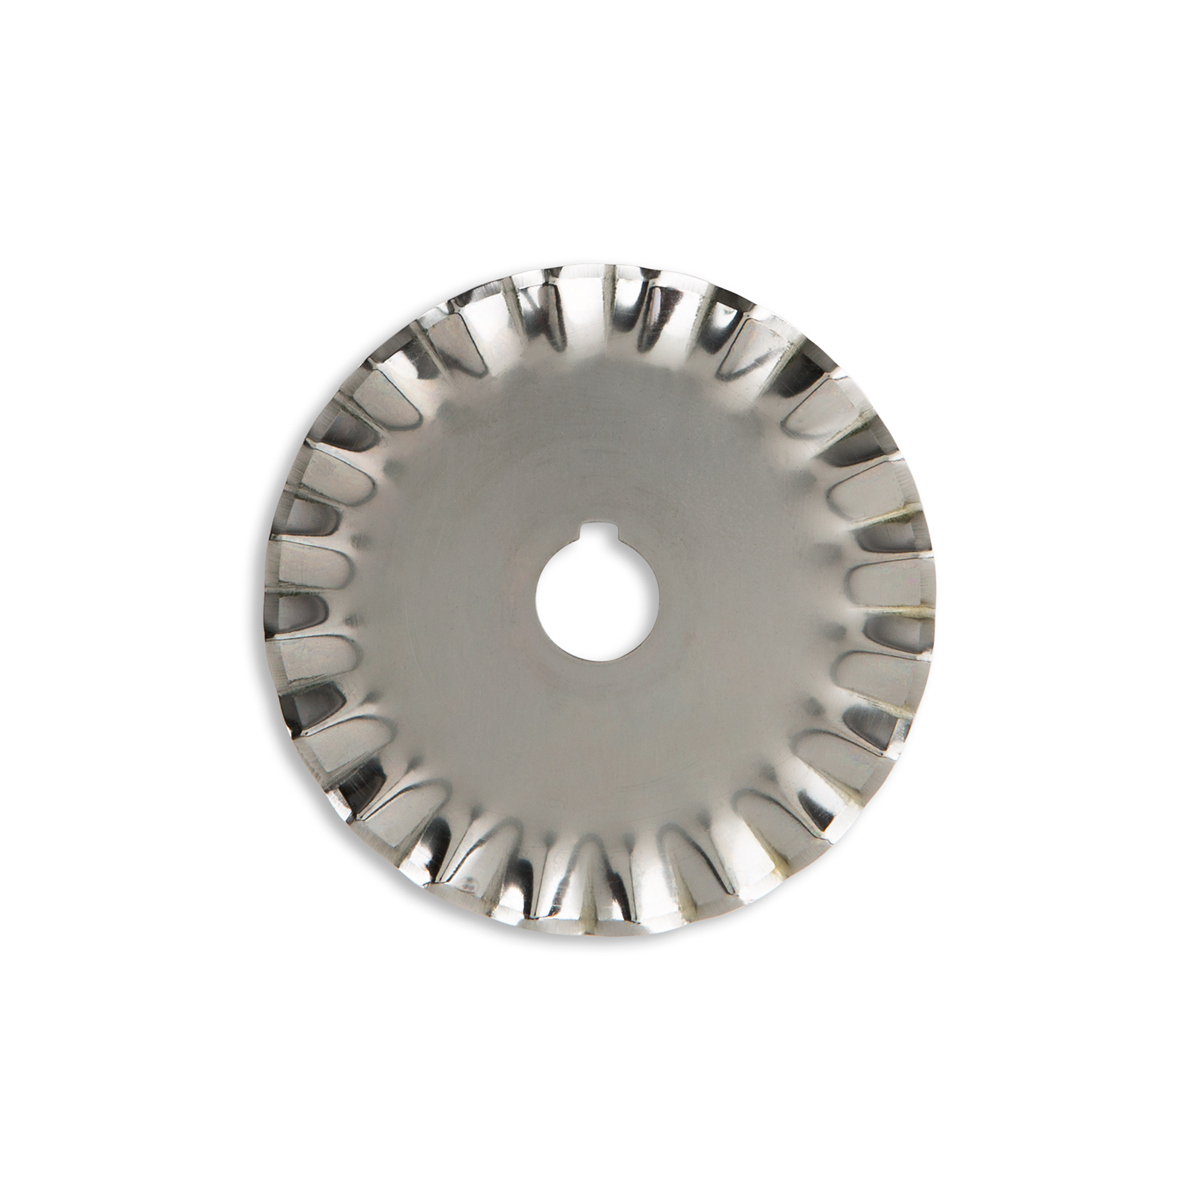 Clover Rotary Cutter Replacement Blade - 45mm Pinking